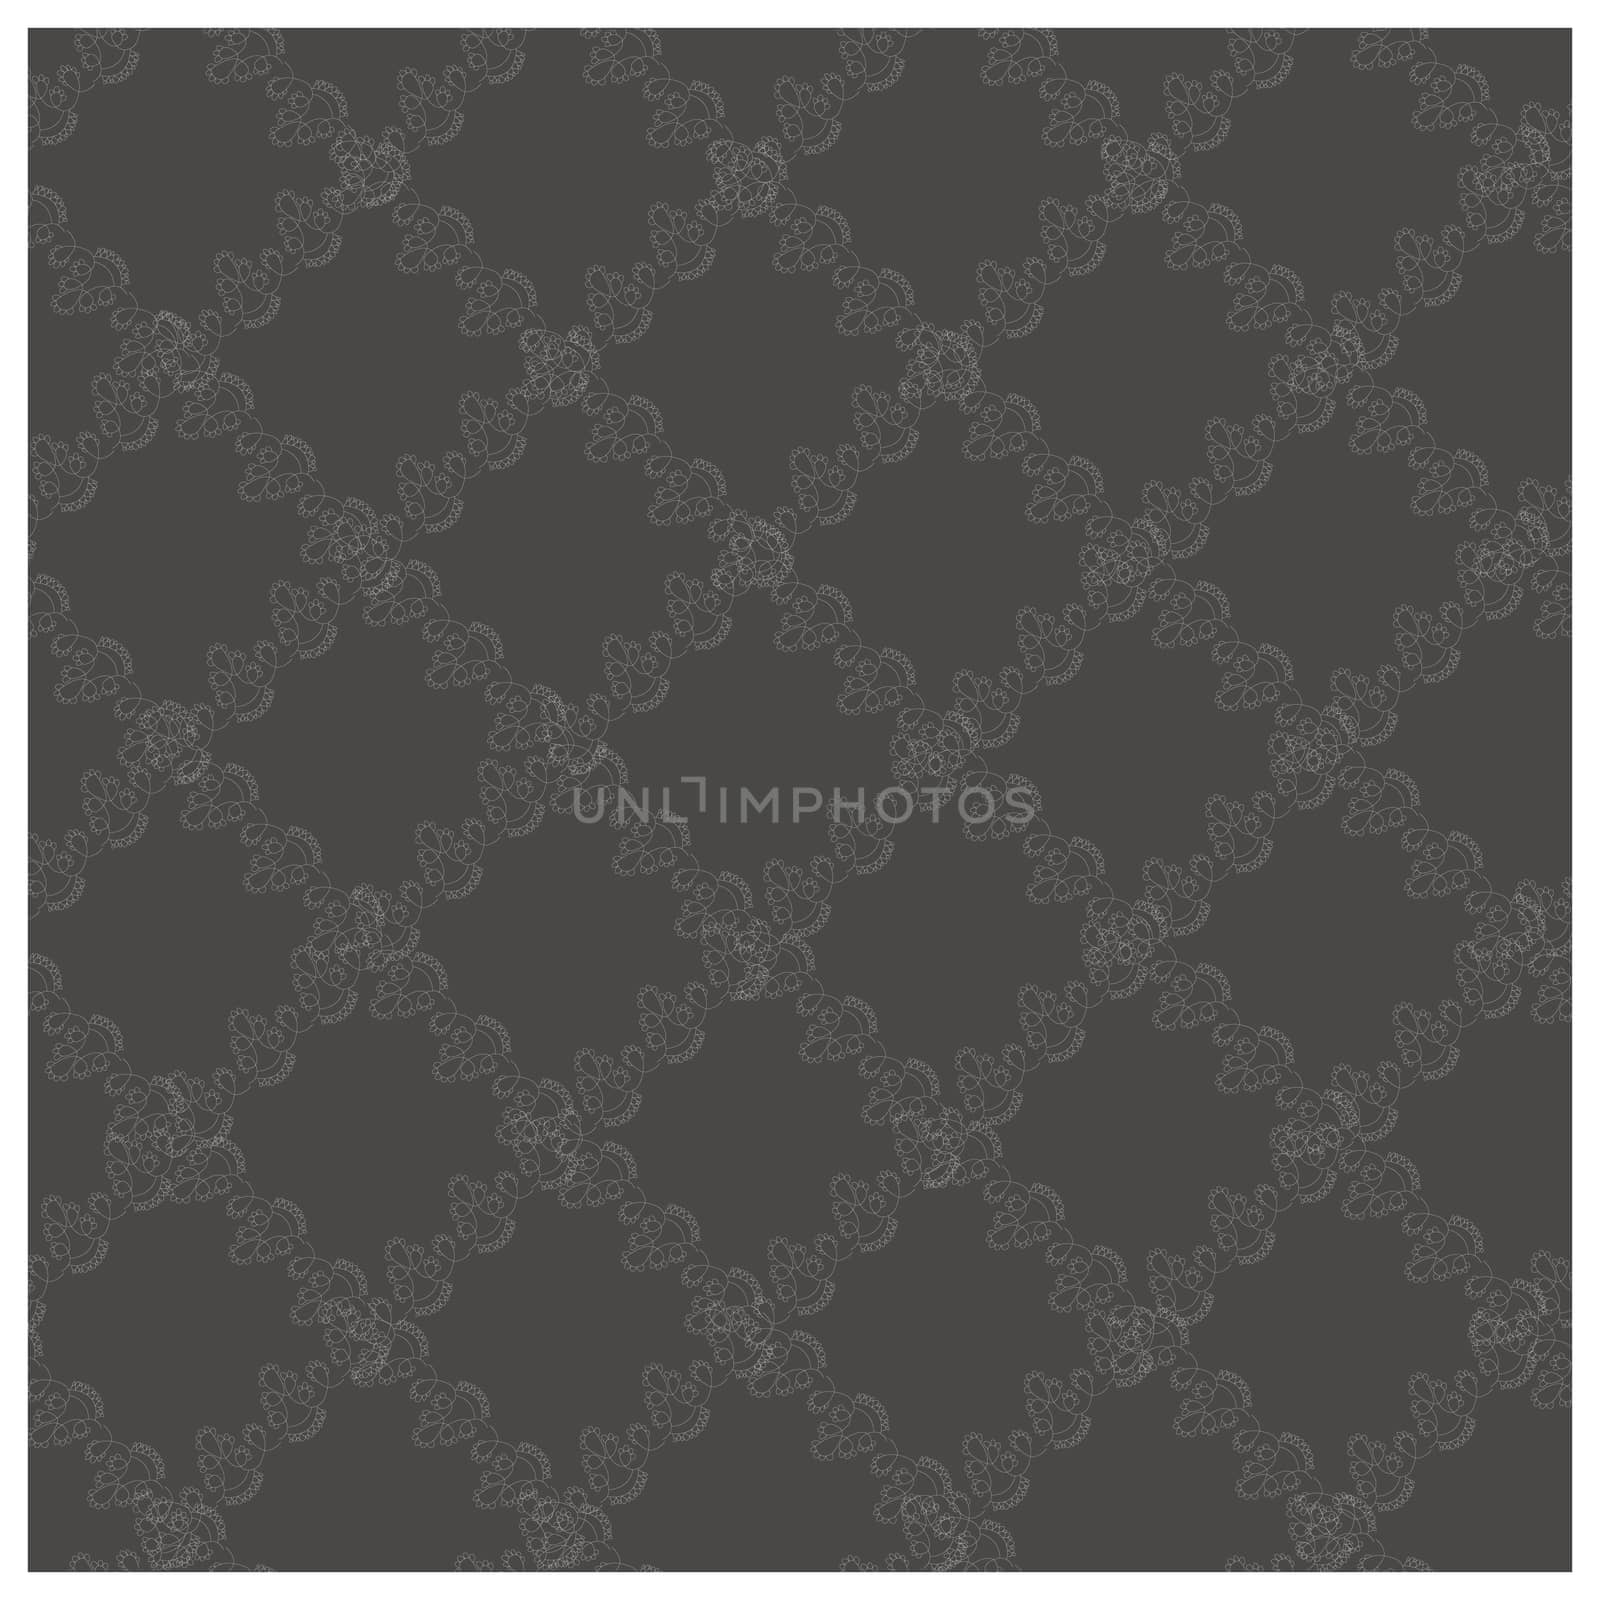 Seamless pattern of lace rhombuses. Geometric dark background jewellery ornament style illustration.  Sketch wrapping paper, texture, background vector fill.